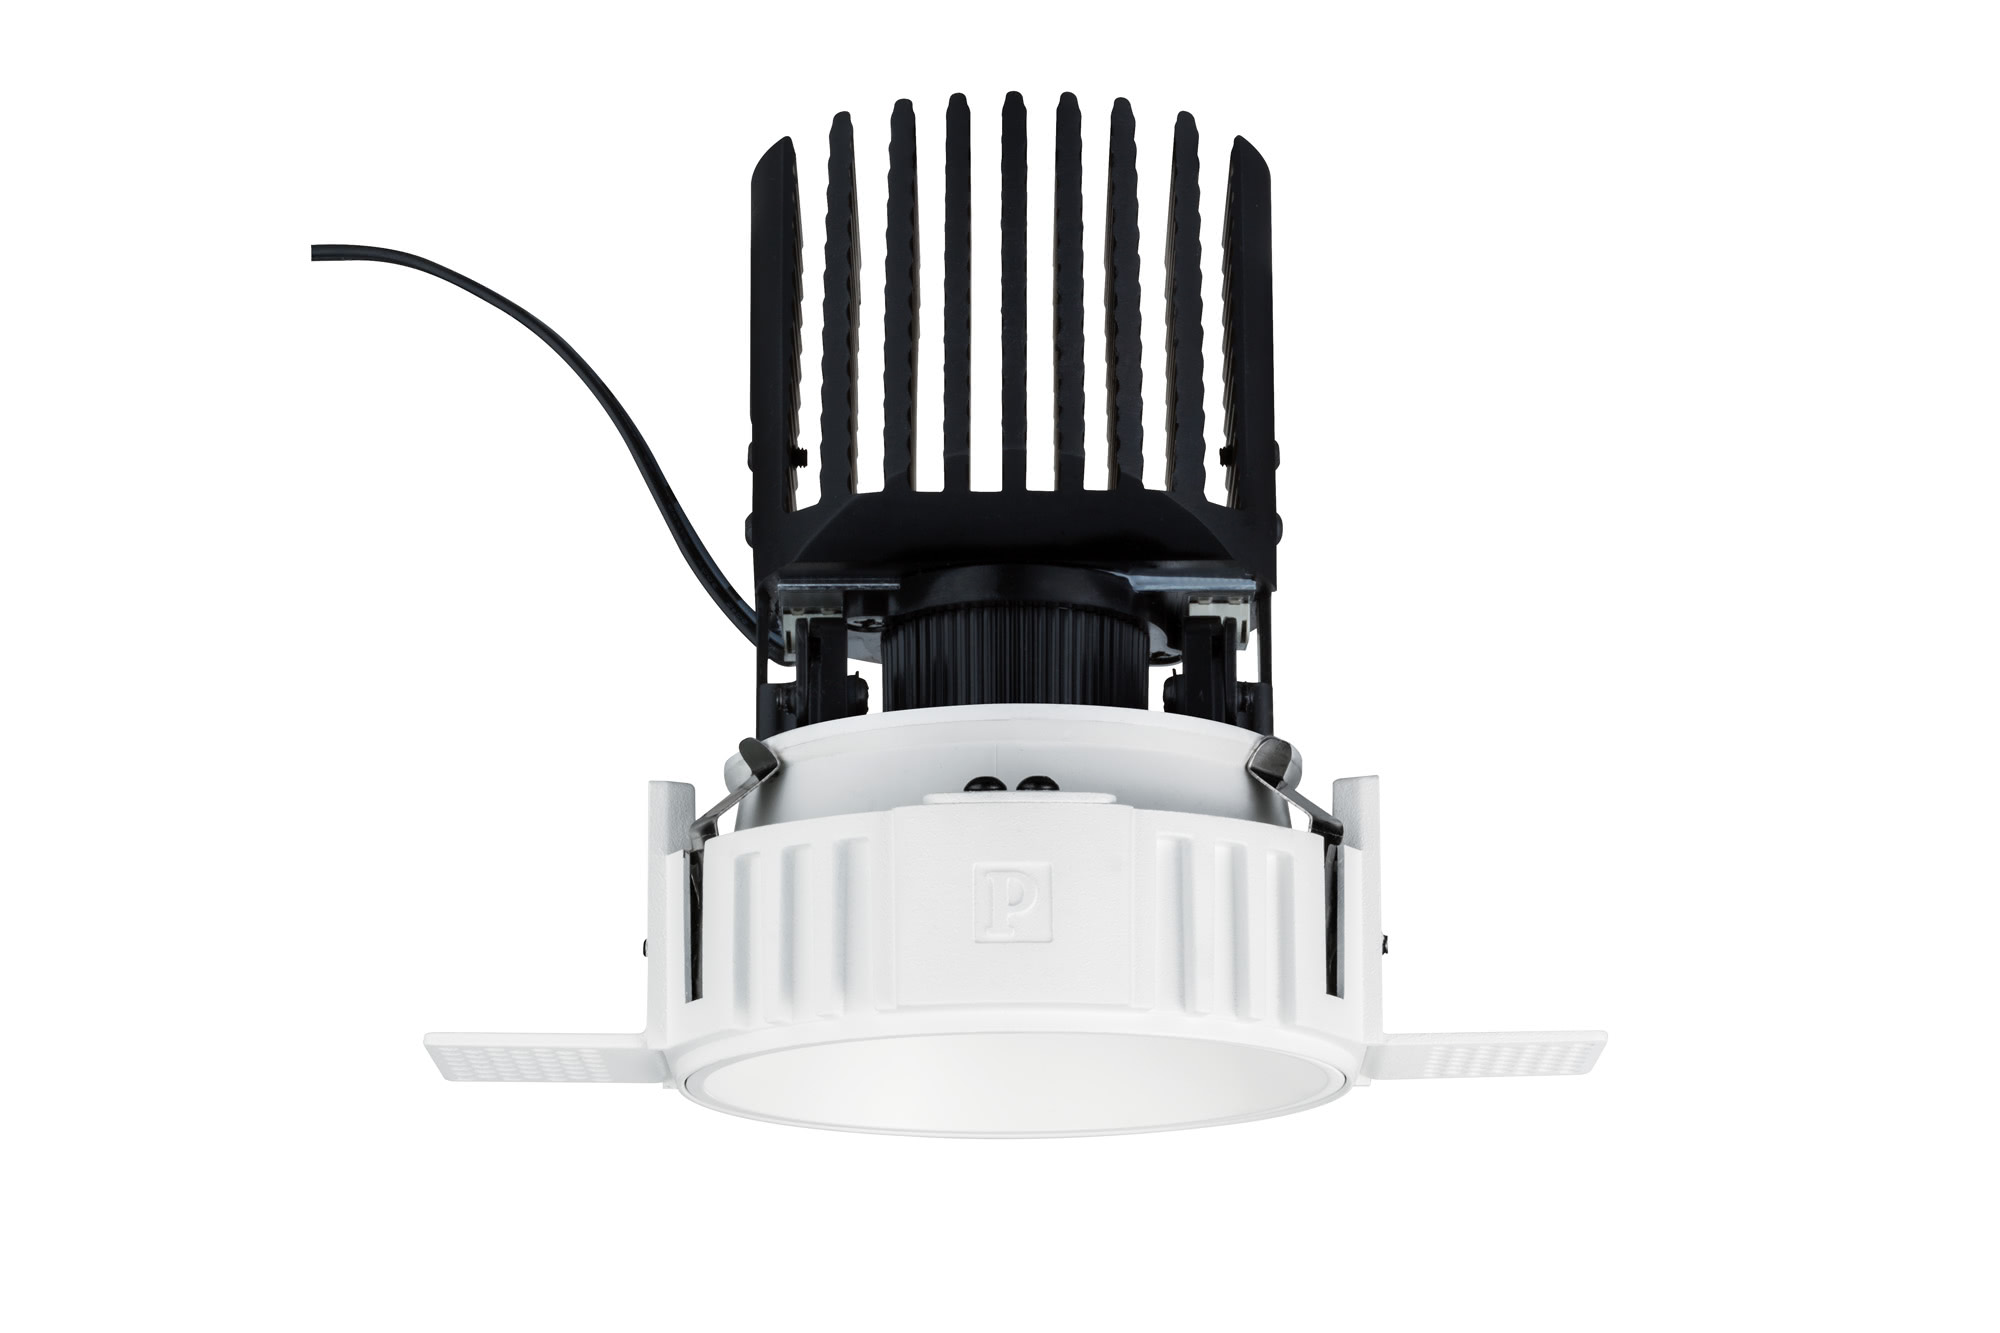 92653 Светильник встроенный Luca IP44 39  Einputzrahmen LED Downlight Set, splash-protected on the room side, with interchangeable lens. Optimum cooling properties ensure a long LED service life (NTC interface can also be used). Single set incl. transformer for easy high-voltage connection. Standard 39В  lens included. Incl. plug-in system connection. 926.53 Paulmann